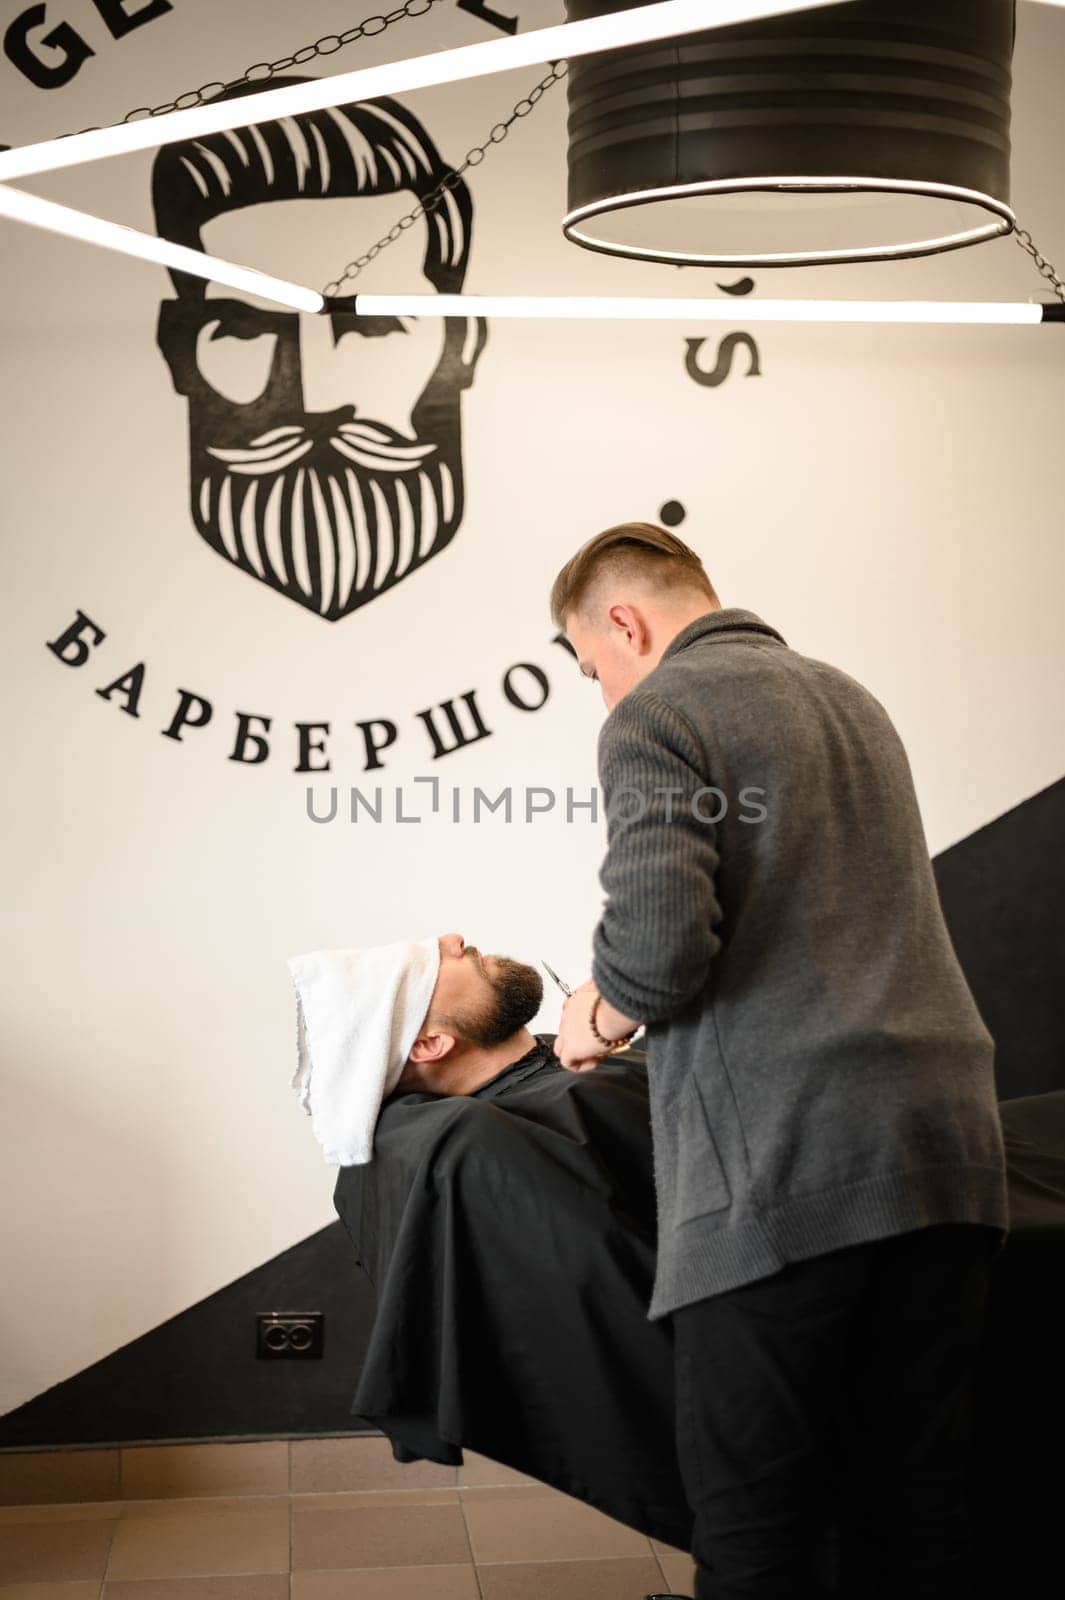 A barber stylist trims the beard of a Caucasian man, whose face is covered with a towel, with scissors